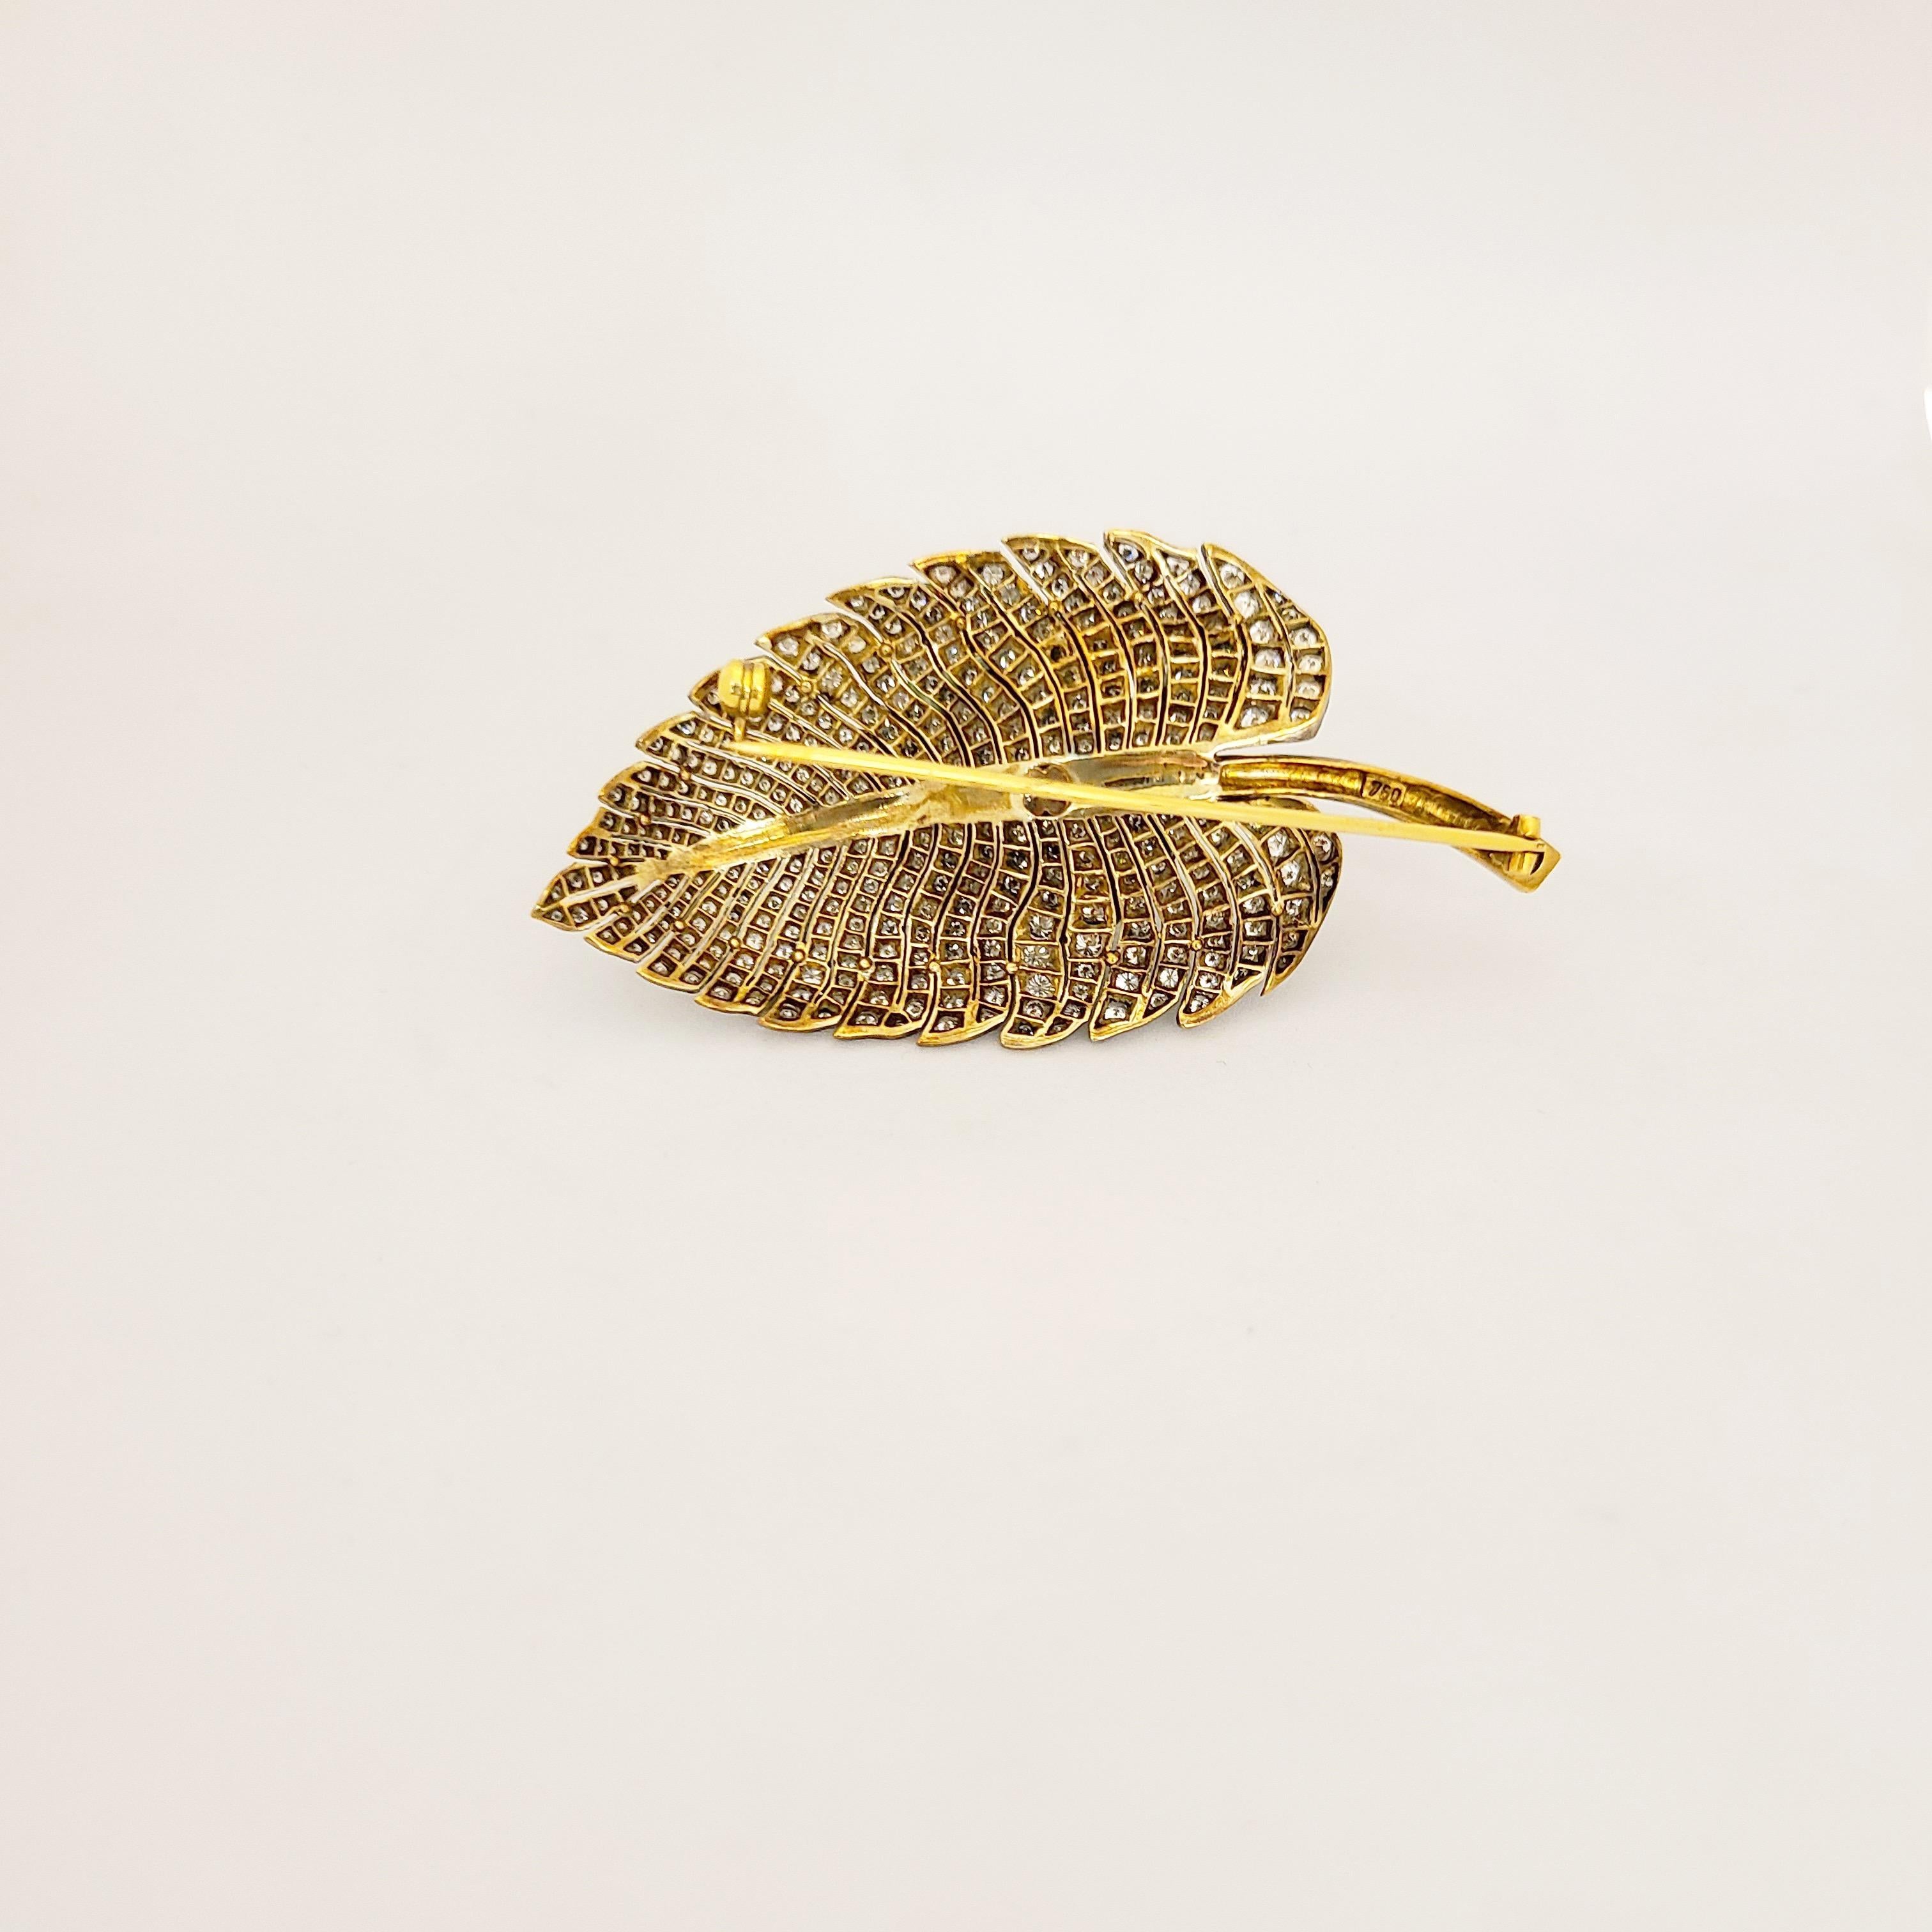 Irlan 18 Karat Gold and Enamel Frog on a 5.65 Carat Diamond Lily Pad Brooch In New Condition For Sale In New York, NY